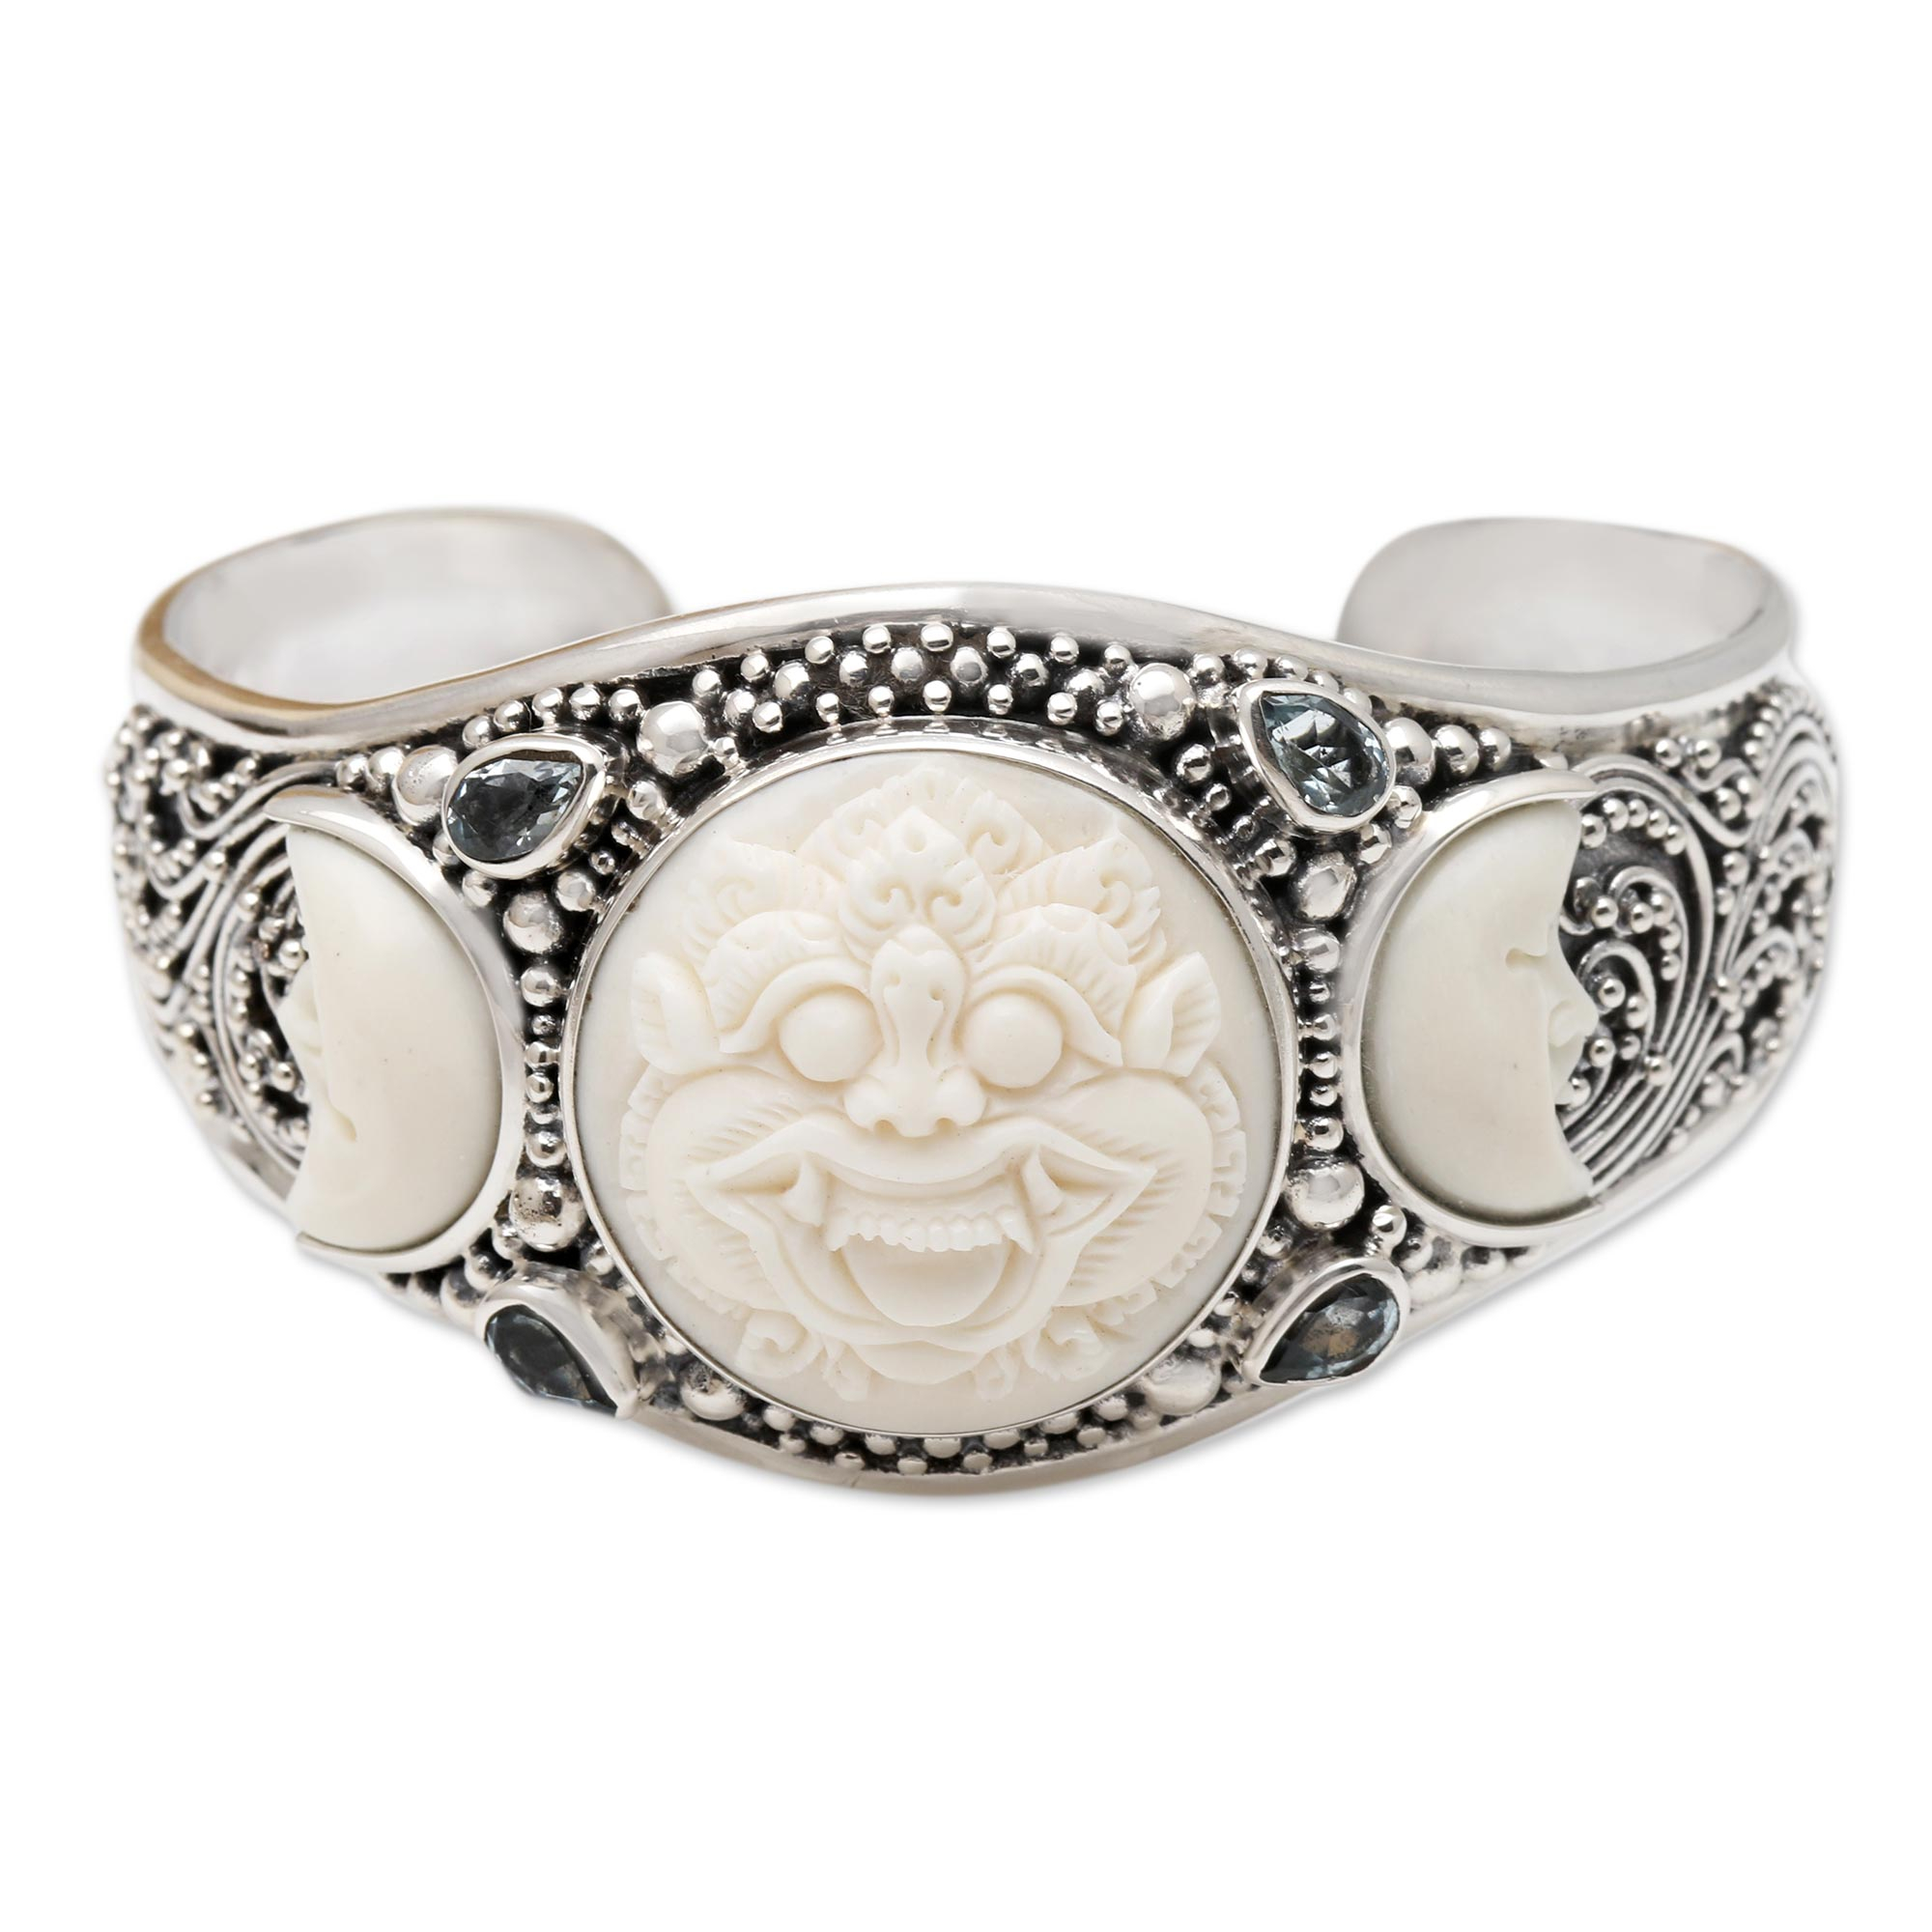 Our Five Best-Selling Balinese Jewelry Wholesale - Karen Silver Design